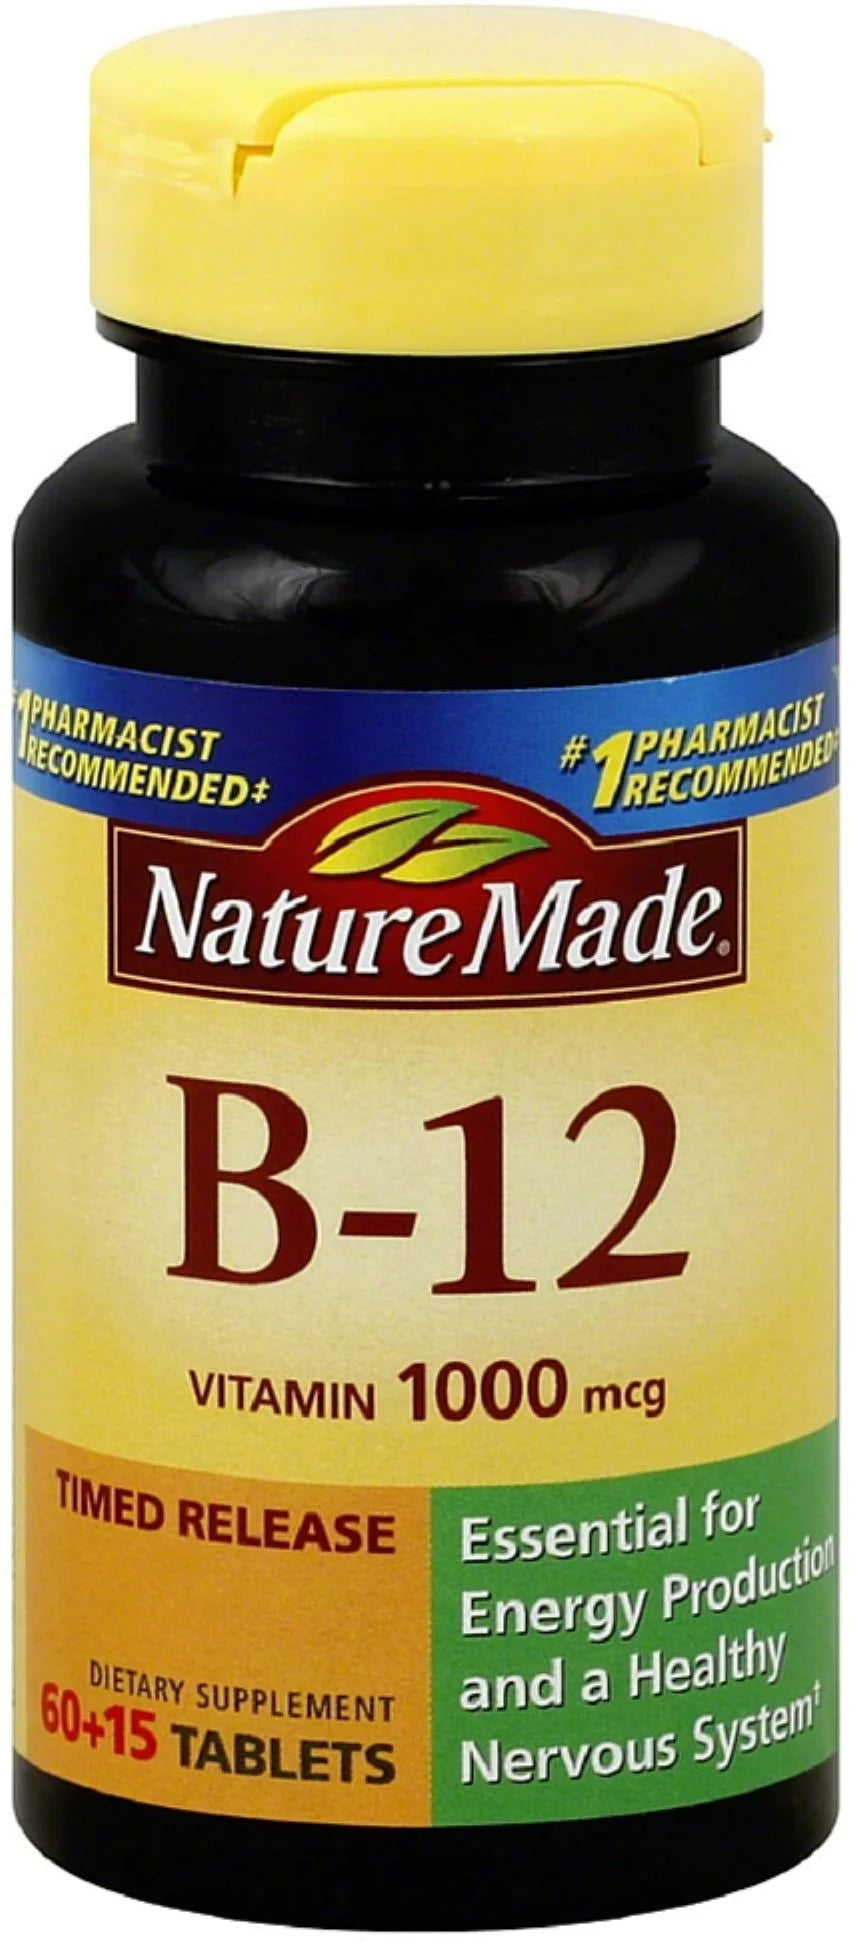 Nature Made Vitamin B-12 Timed Release Tablets, 1000 Mcg 75 Ea (Pack of 6)